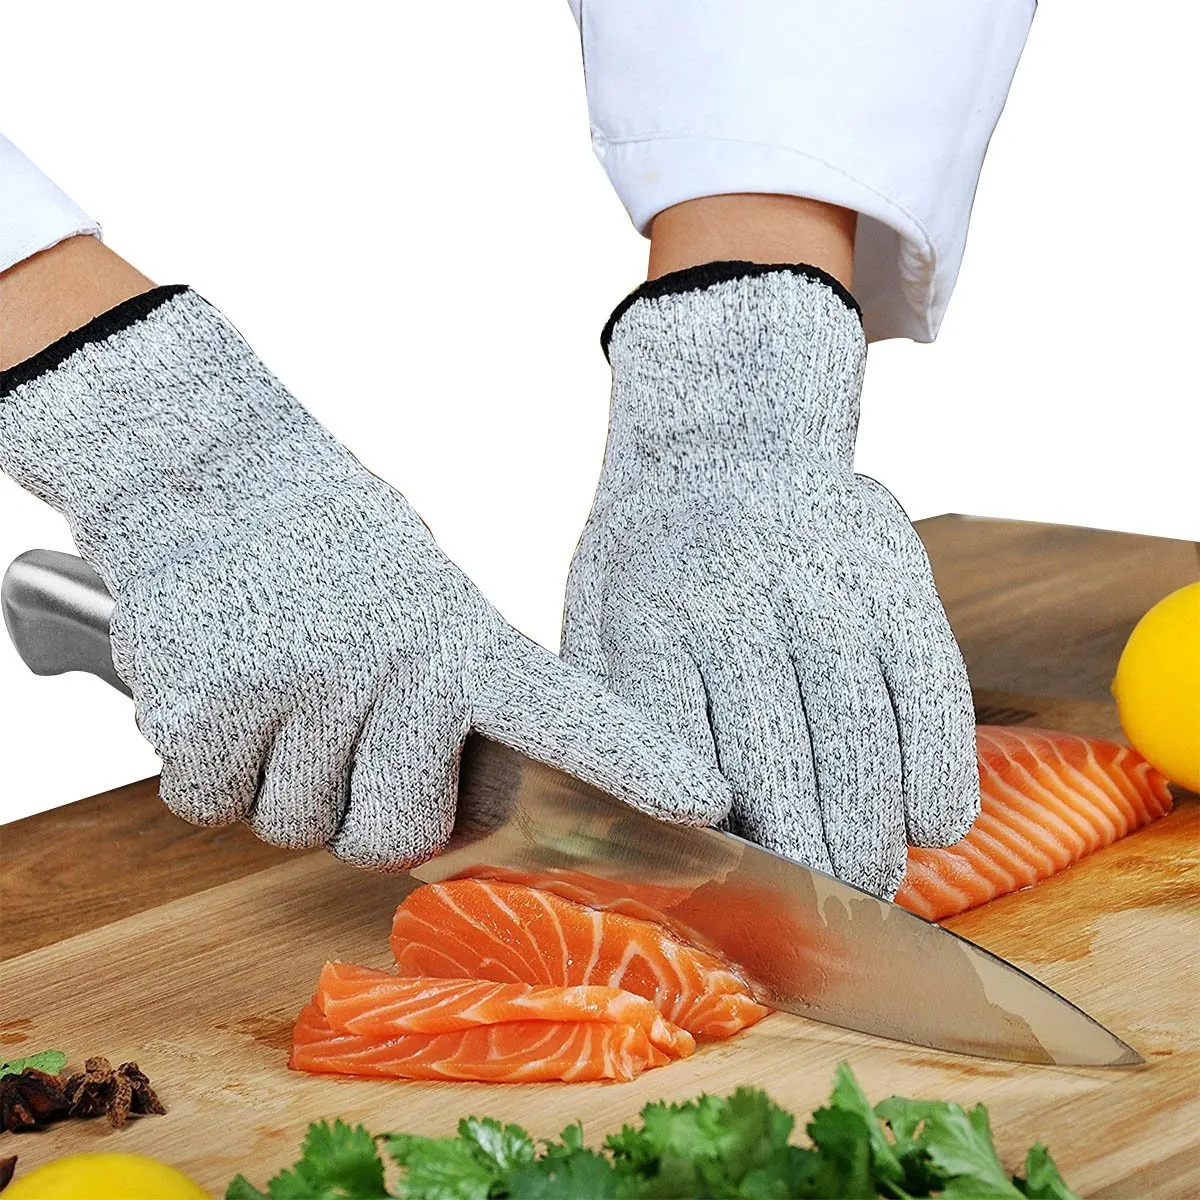 https://ae01.alicdn.com/kf/S90a64157fdfc4de99000490d424f740f0/Anti-cut-Gloves-Safety-Cutting-Proof-Resistant-Stab-Protection-Stainless-Steel-Wire-Metal-Mesh-Butcher-for.jpg